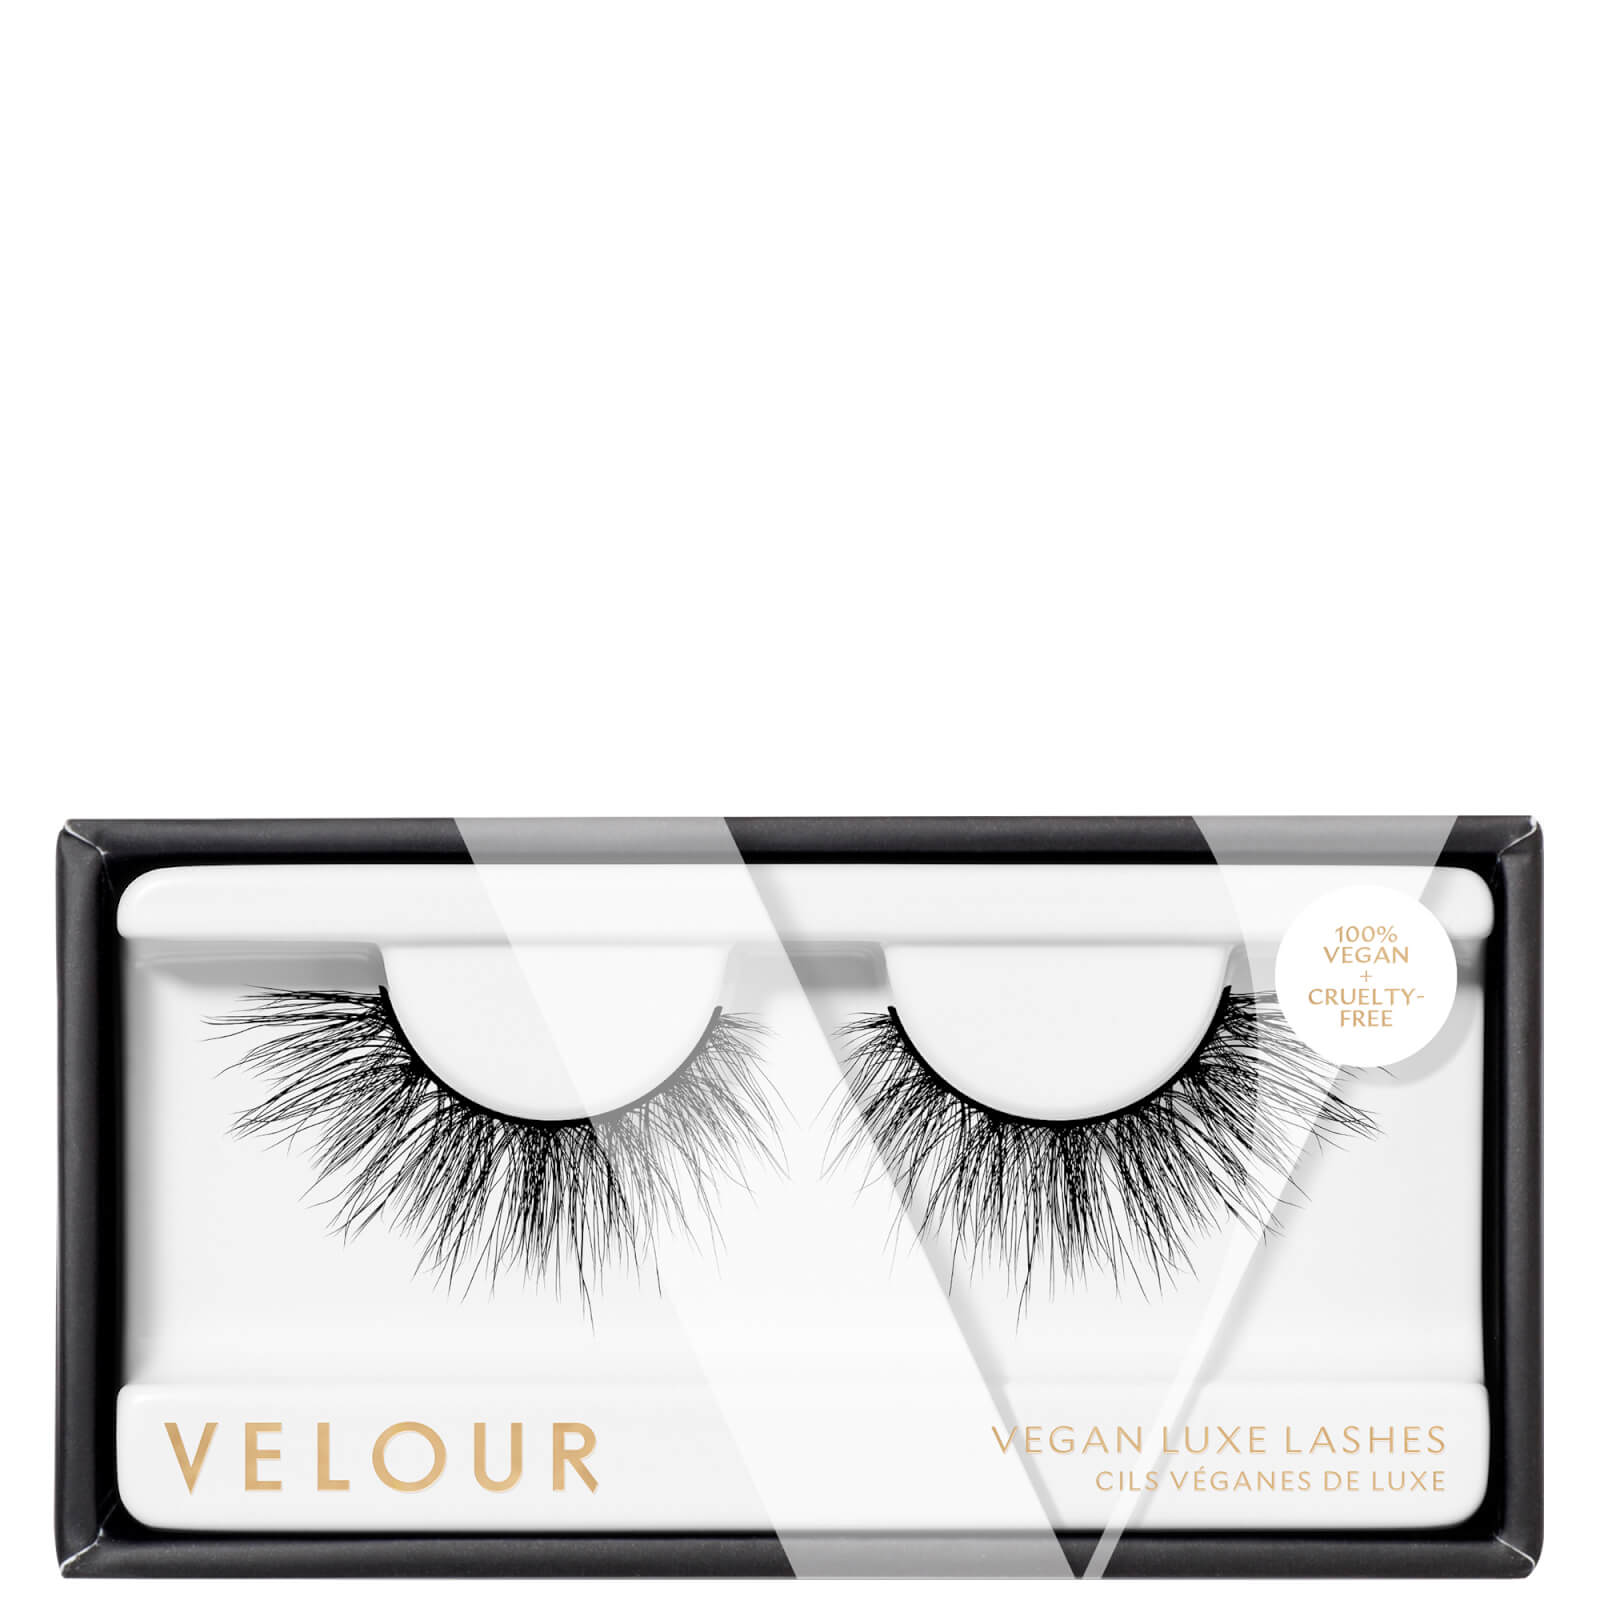 Velour Lashes Vegan Luxe Sinful Lashes